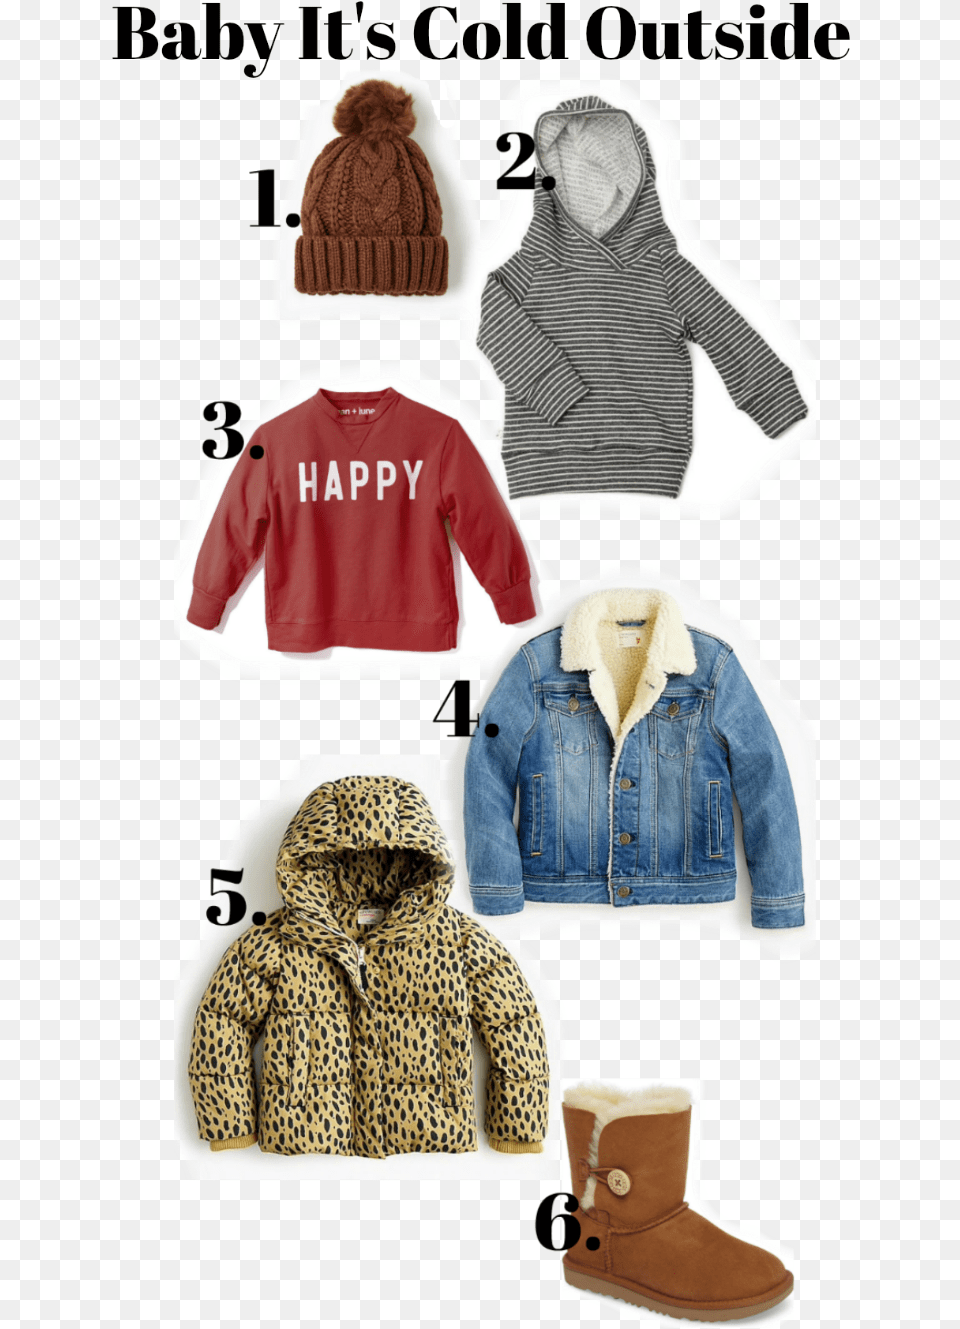 Baby It S Cold Outside Echidna, Hoodie, Clothing, Coat, Sweatshirt Png Image